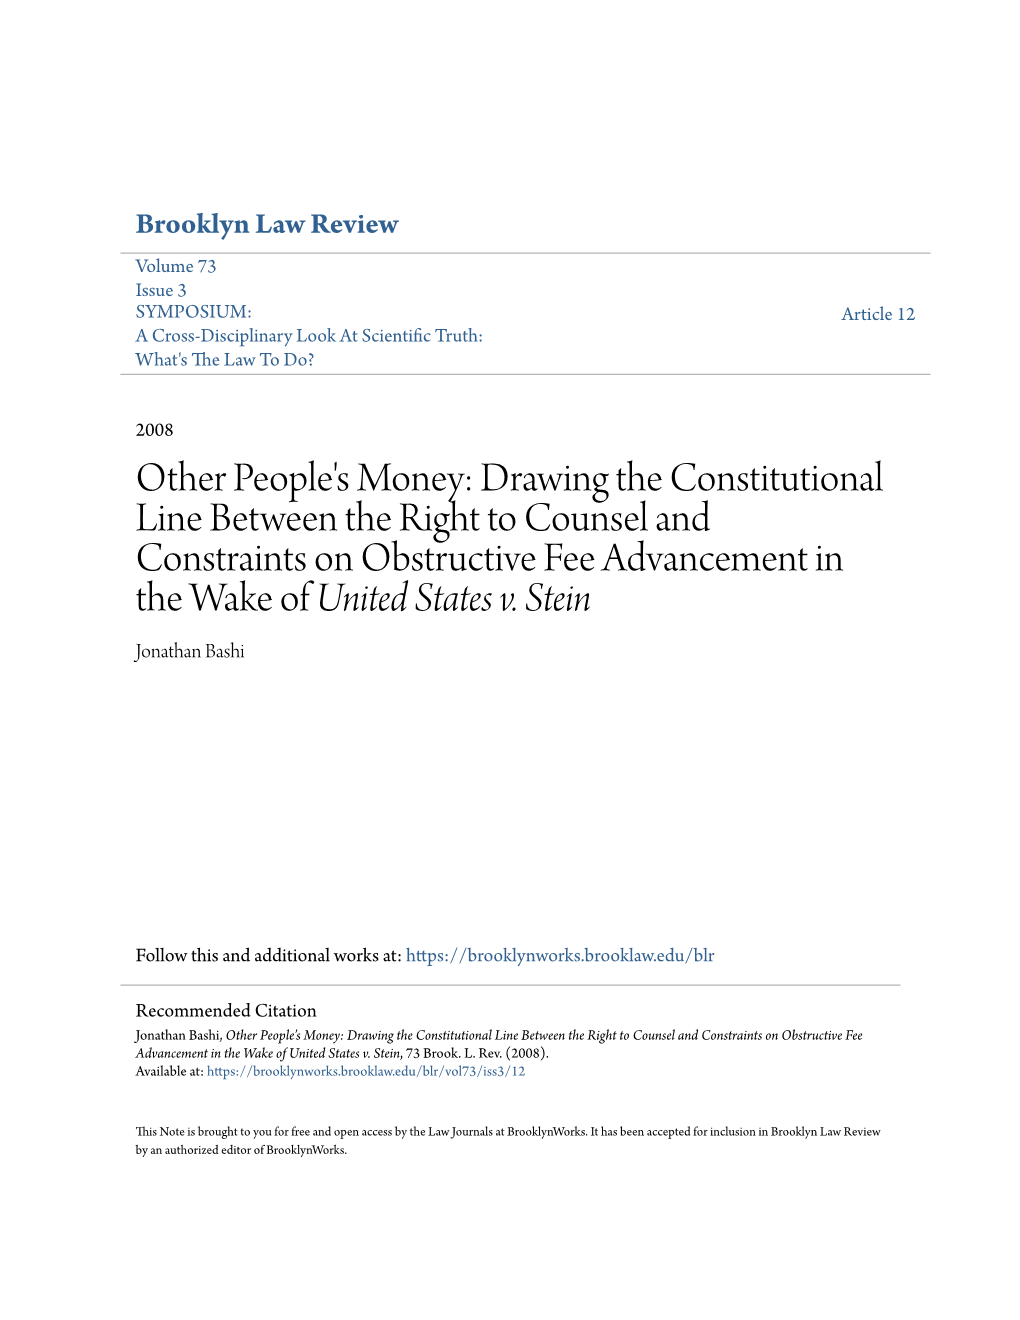 Other People's Money: Drawing the Constitutional Line Between the Right to Counsel and Constraints on Obstructive Fee Advancement in the Wake of United States V